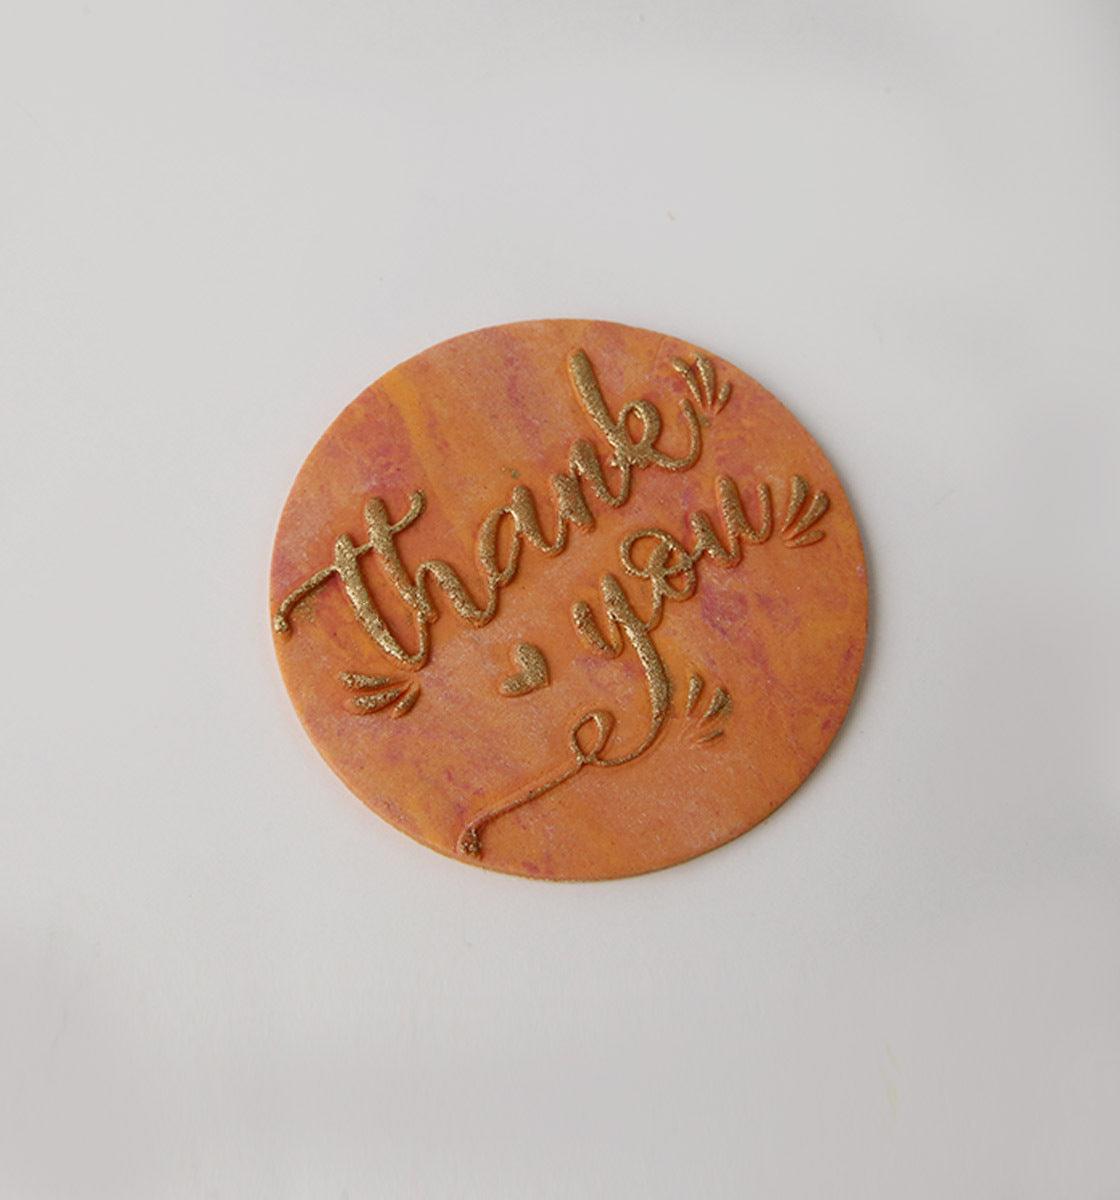 Thank You (Stylized) - Embosser stamp - Inspired Baking 